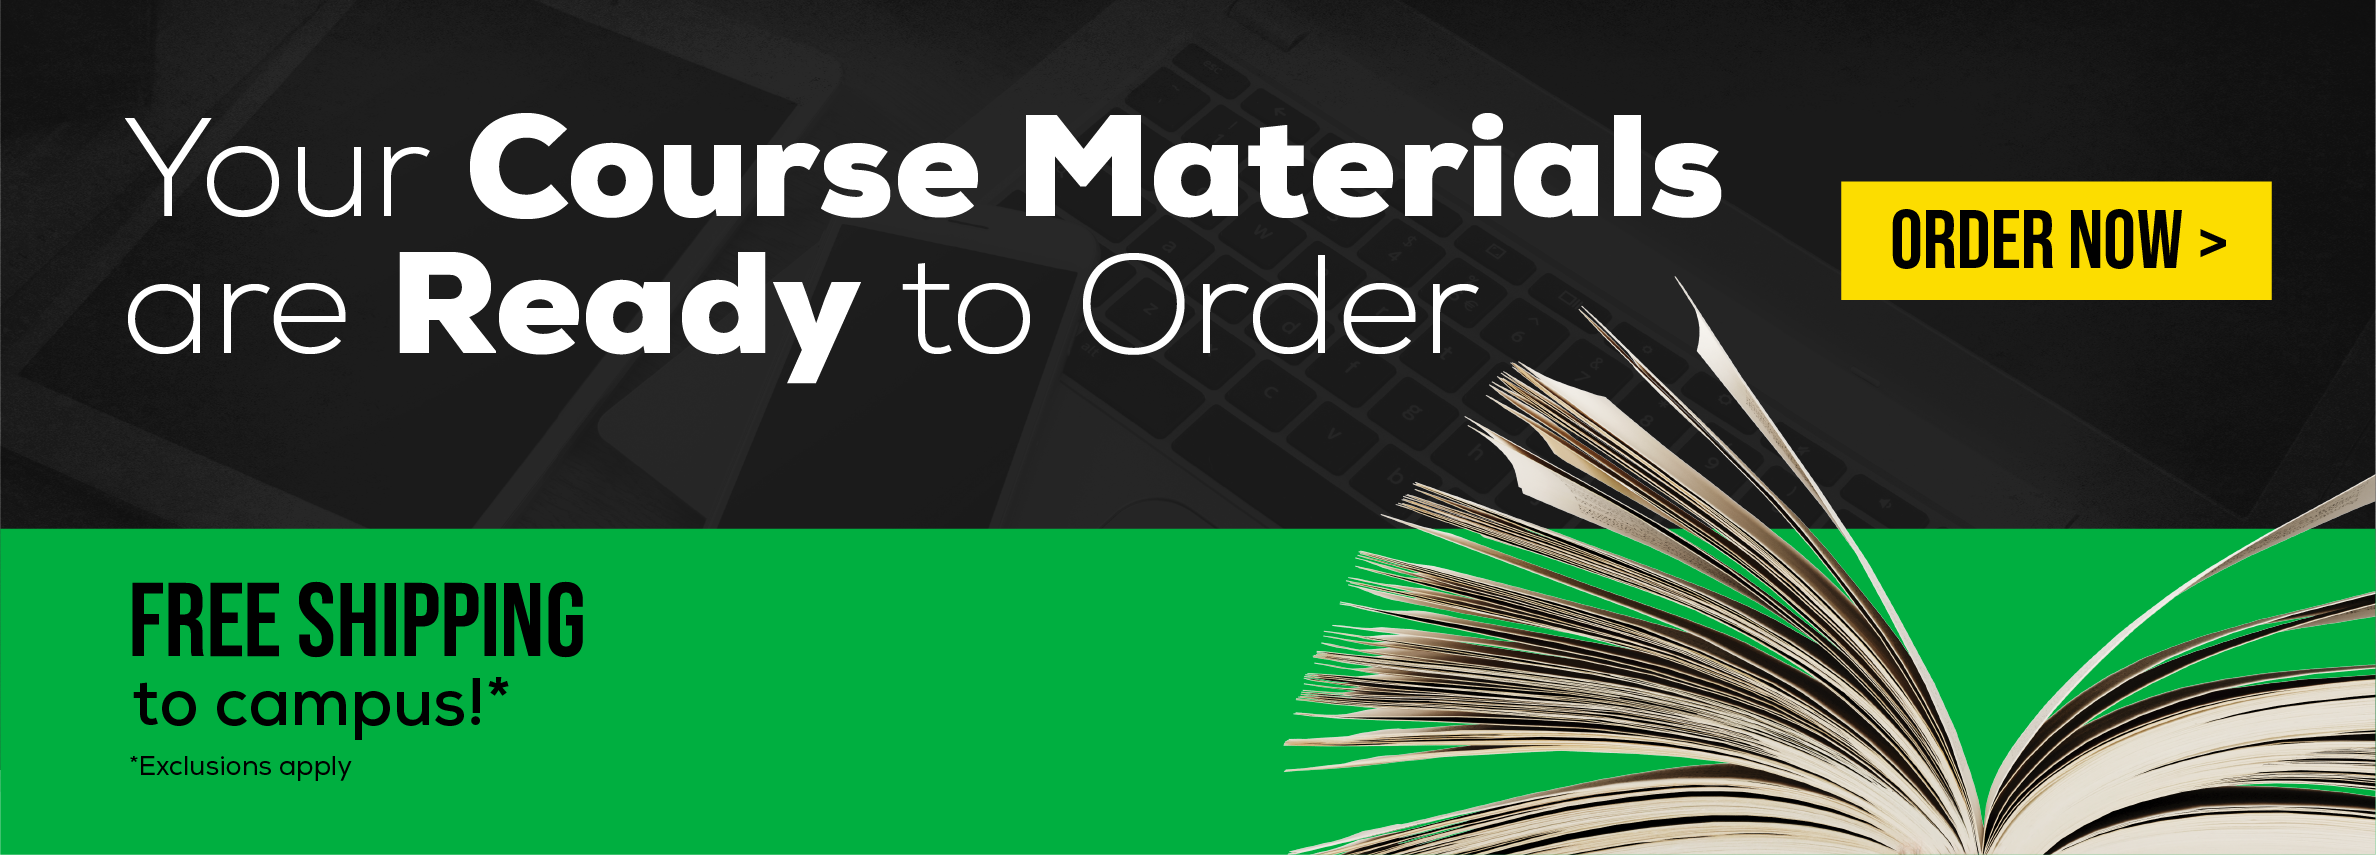 Your Course Materials are Ready to Order. Order Now. Free Shipping to campus!* *Exclusions apply